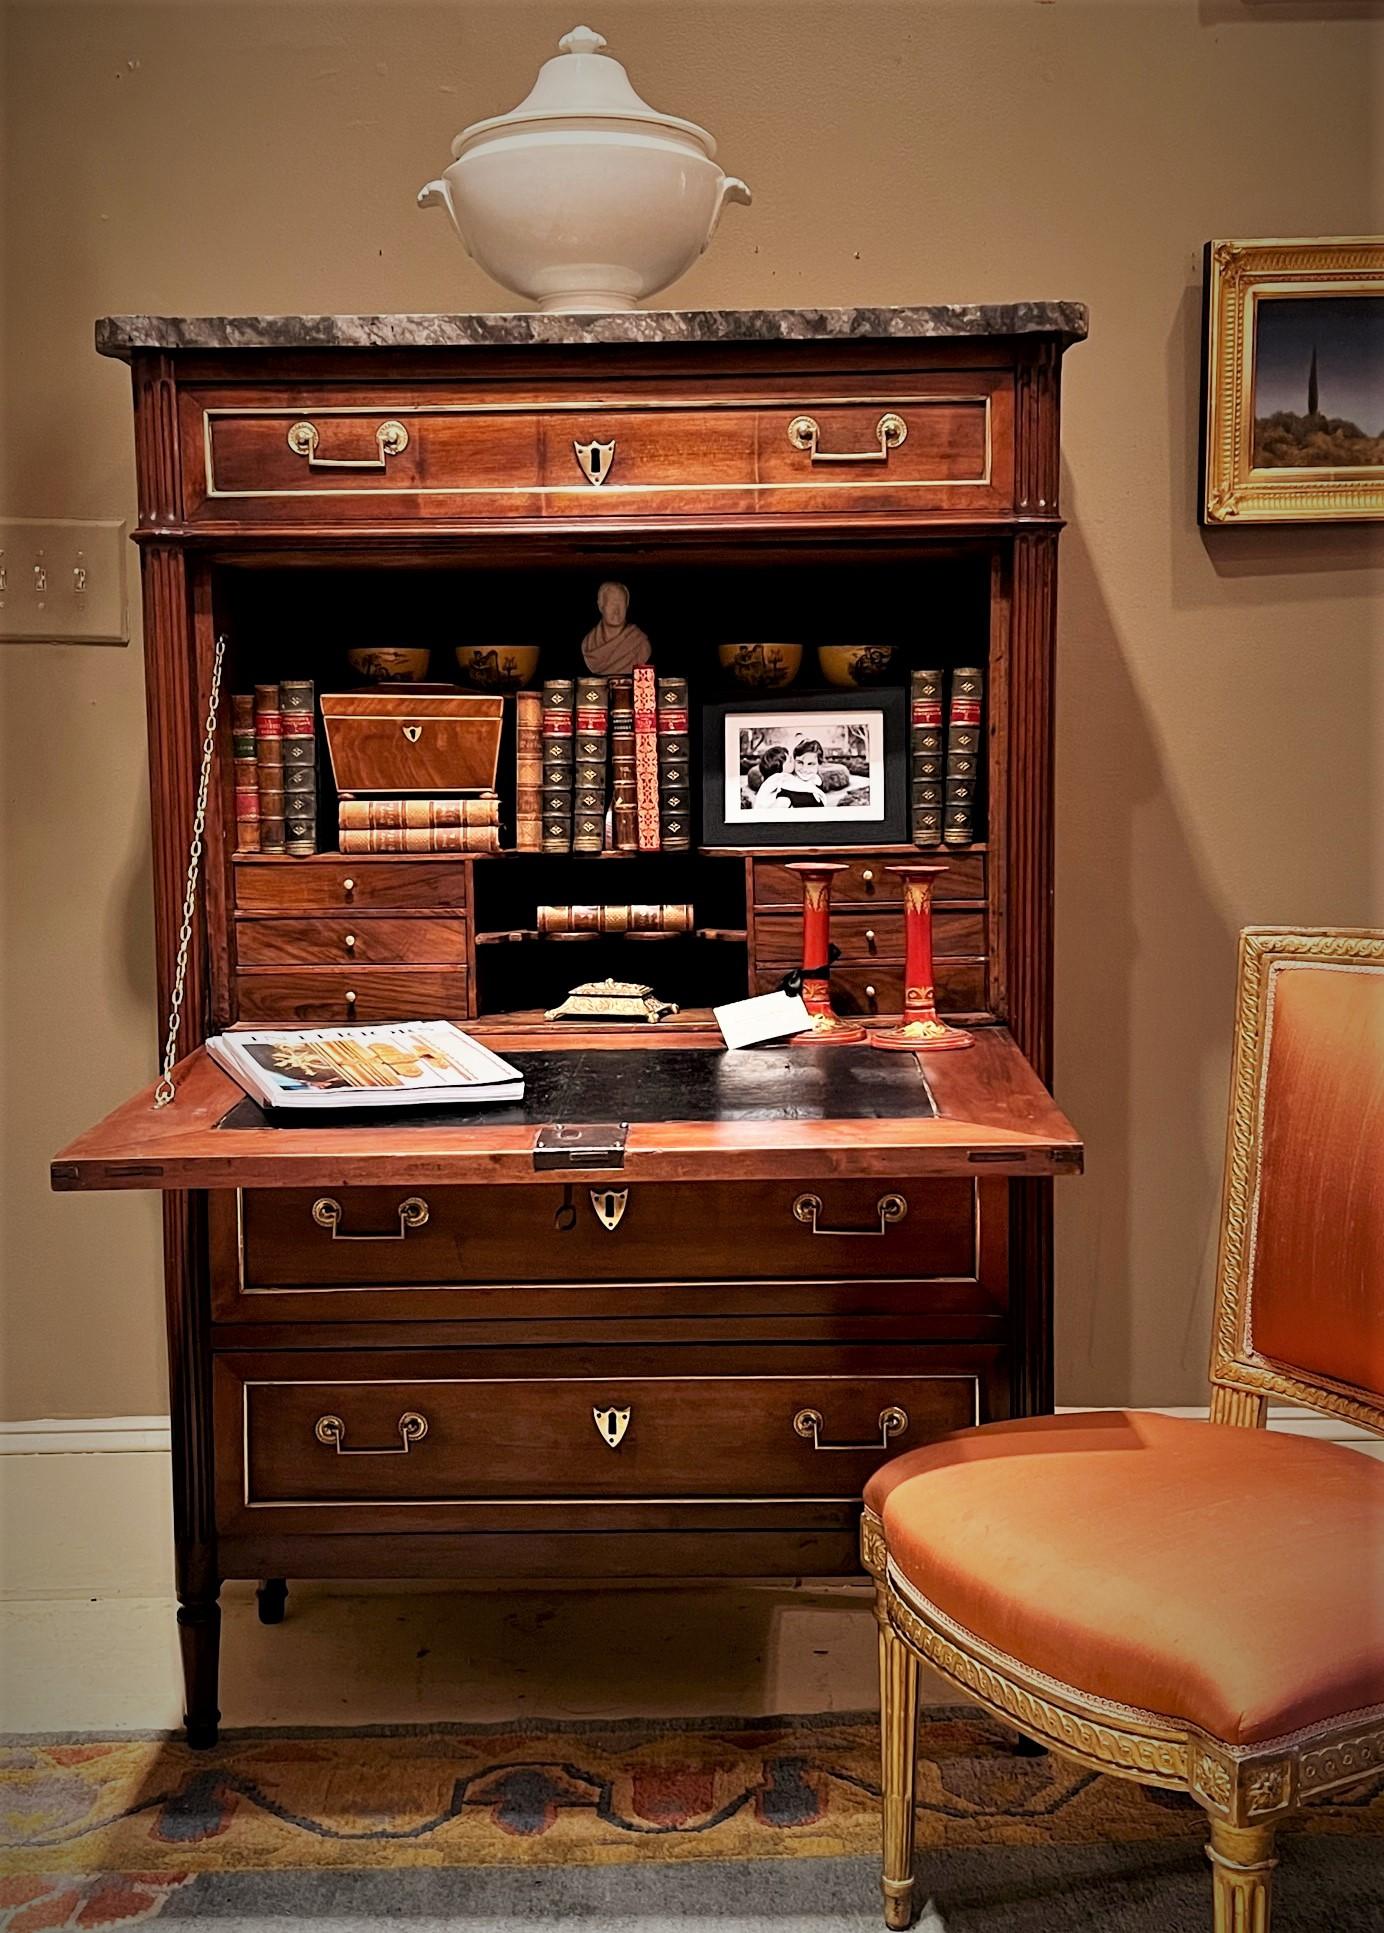 This neo-classic fall-front secretary not only has the beauty of Louis XVI style furniture but is very practical for modern living. It is perfect for small spaces, yet still provides a lot of storage and a large desk surface quite suitable for a